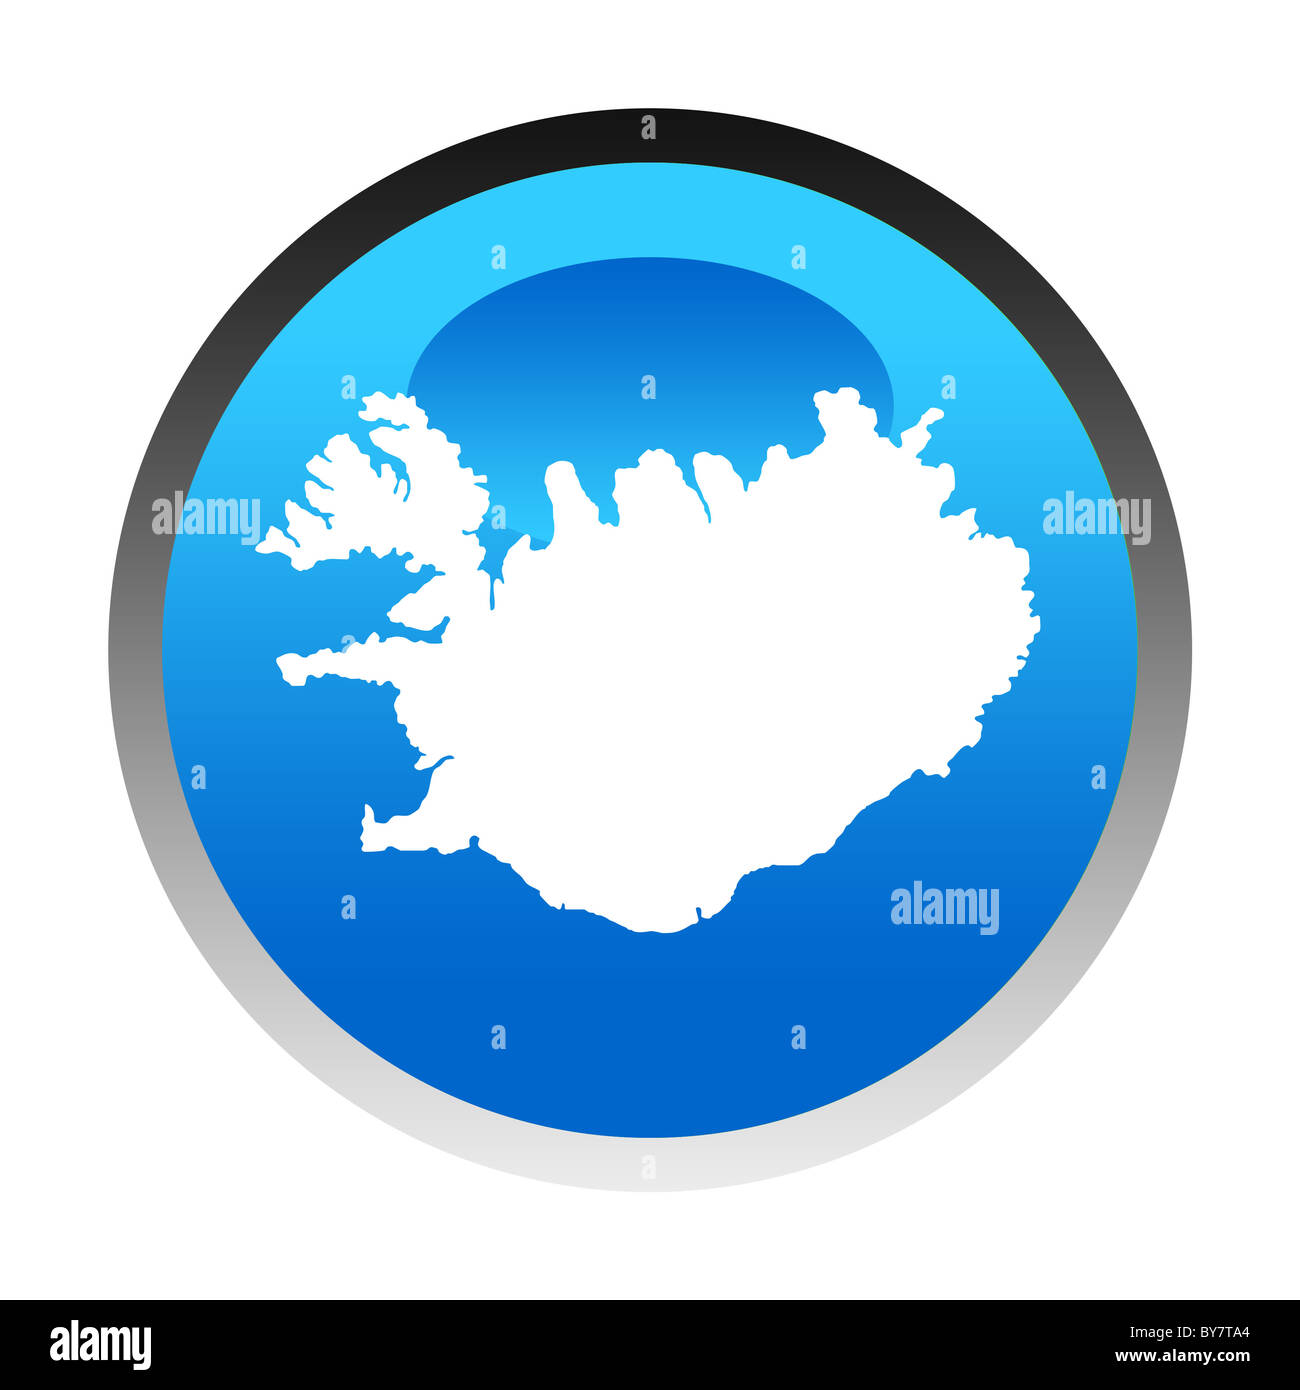 Iceland map blue circular button isolated on white background. Stock Photo